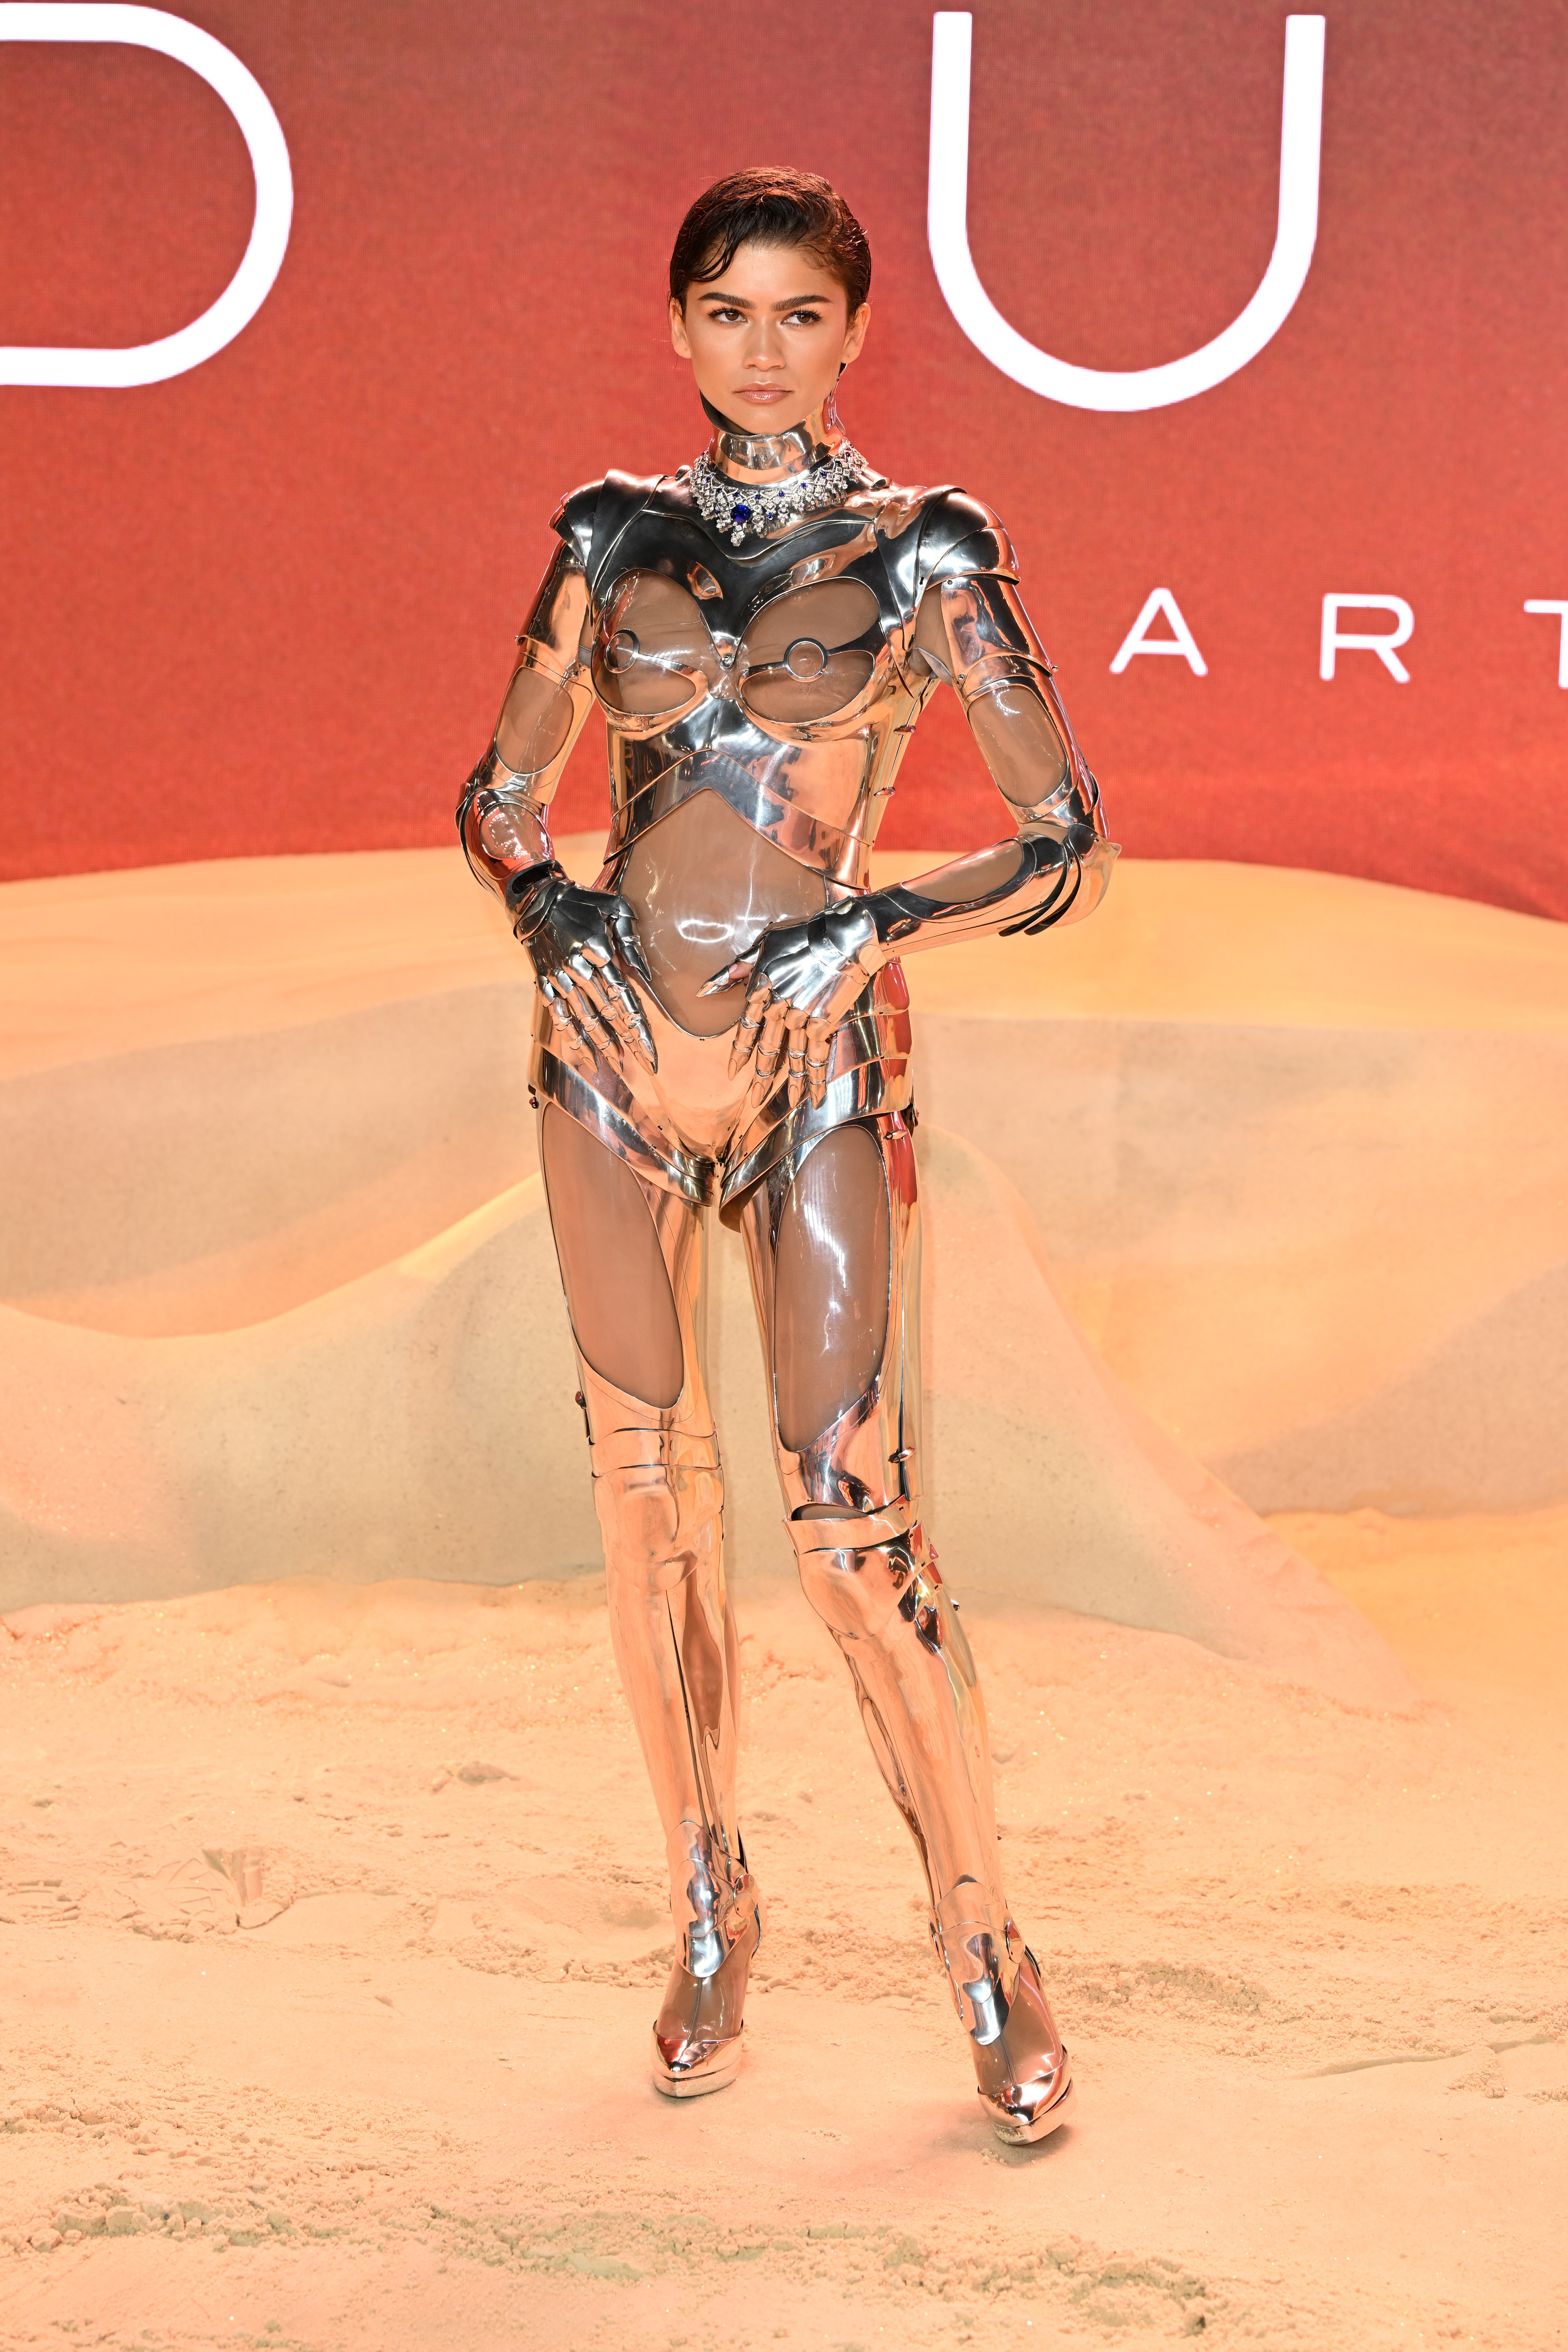 Zendaya in a futuristic metallic bodysuit stands in front of a branded backdrop